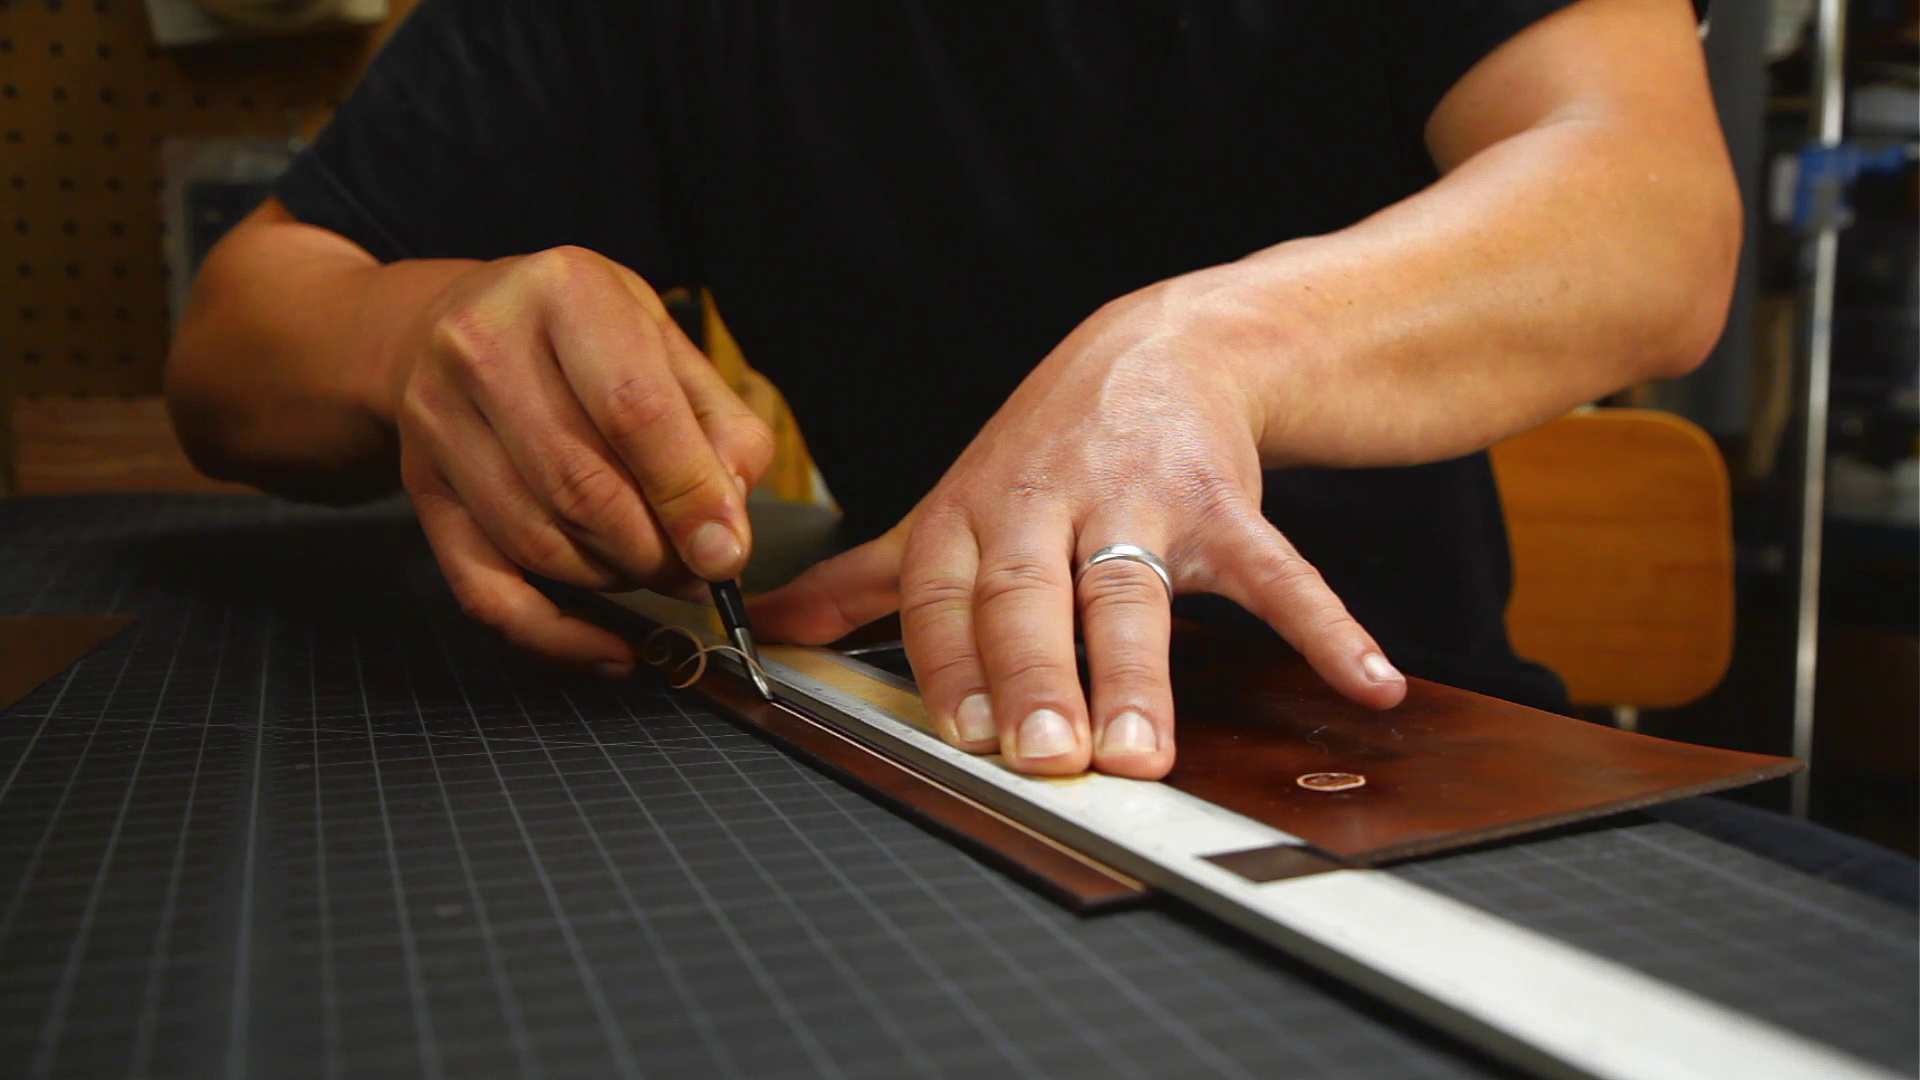 Geoff Franklin from Walnut Studiolo cutting away the surface of a dark brown dyed piece of leather to reveal the natural leather underneath with a special leather handworking tool on a black gridded cutting mat. Photo is a still from the video about handmade by Walnut from Cineastas PDX